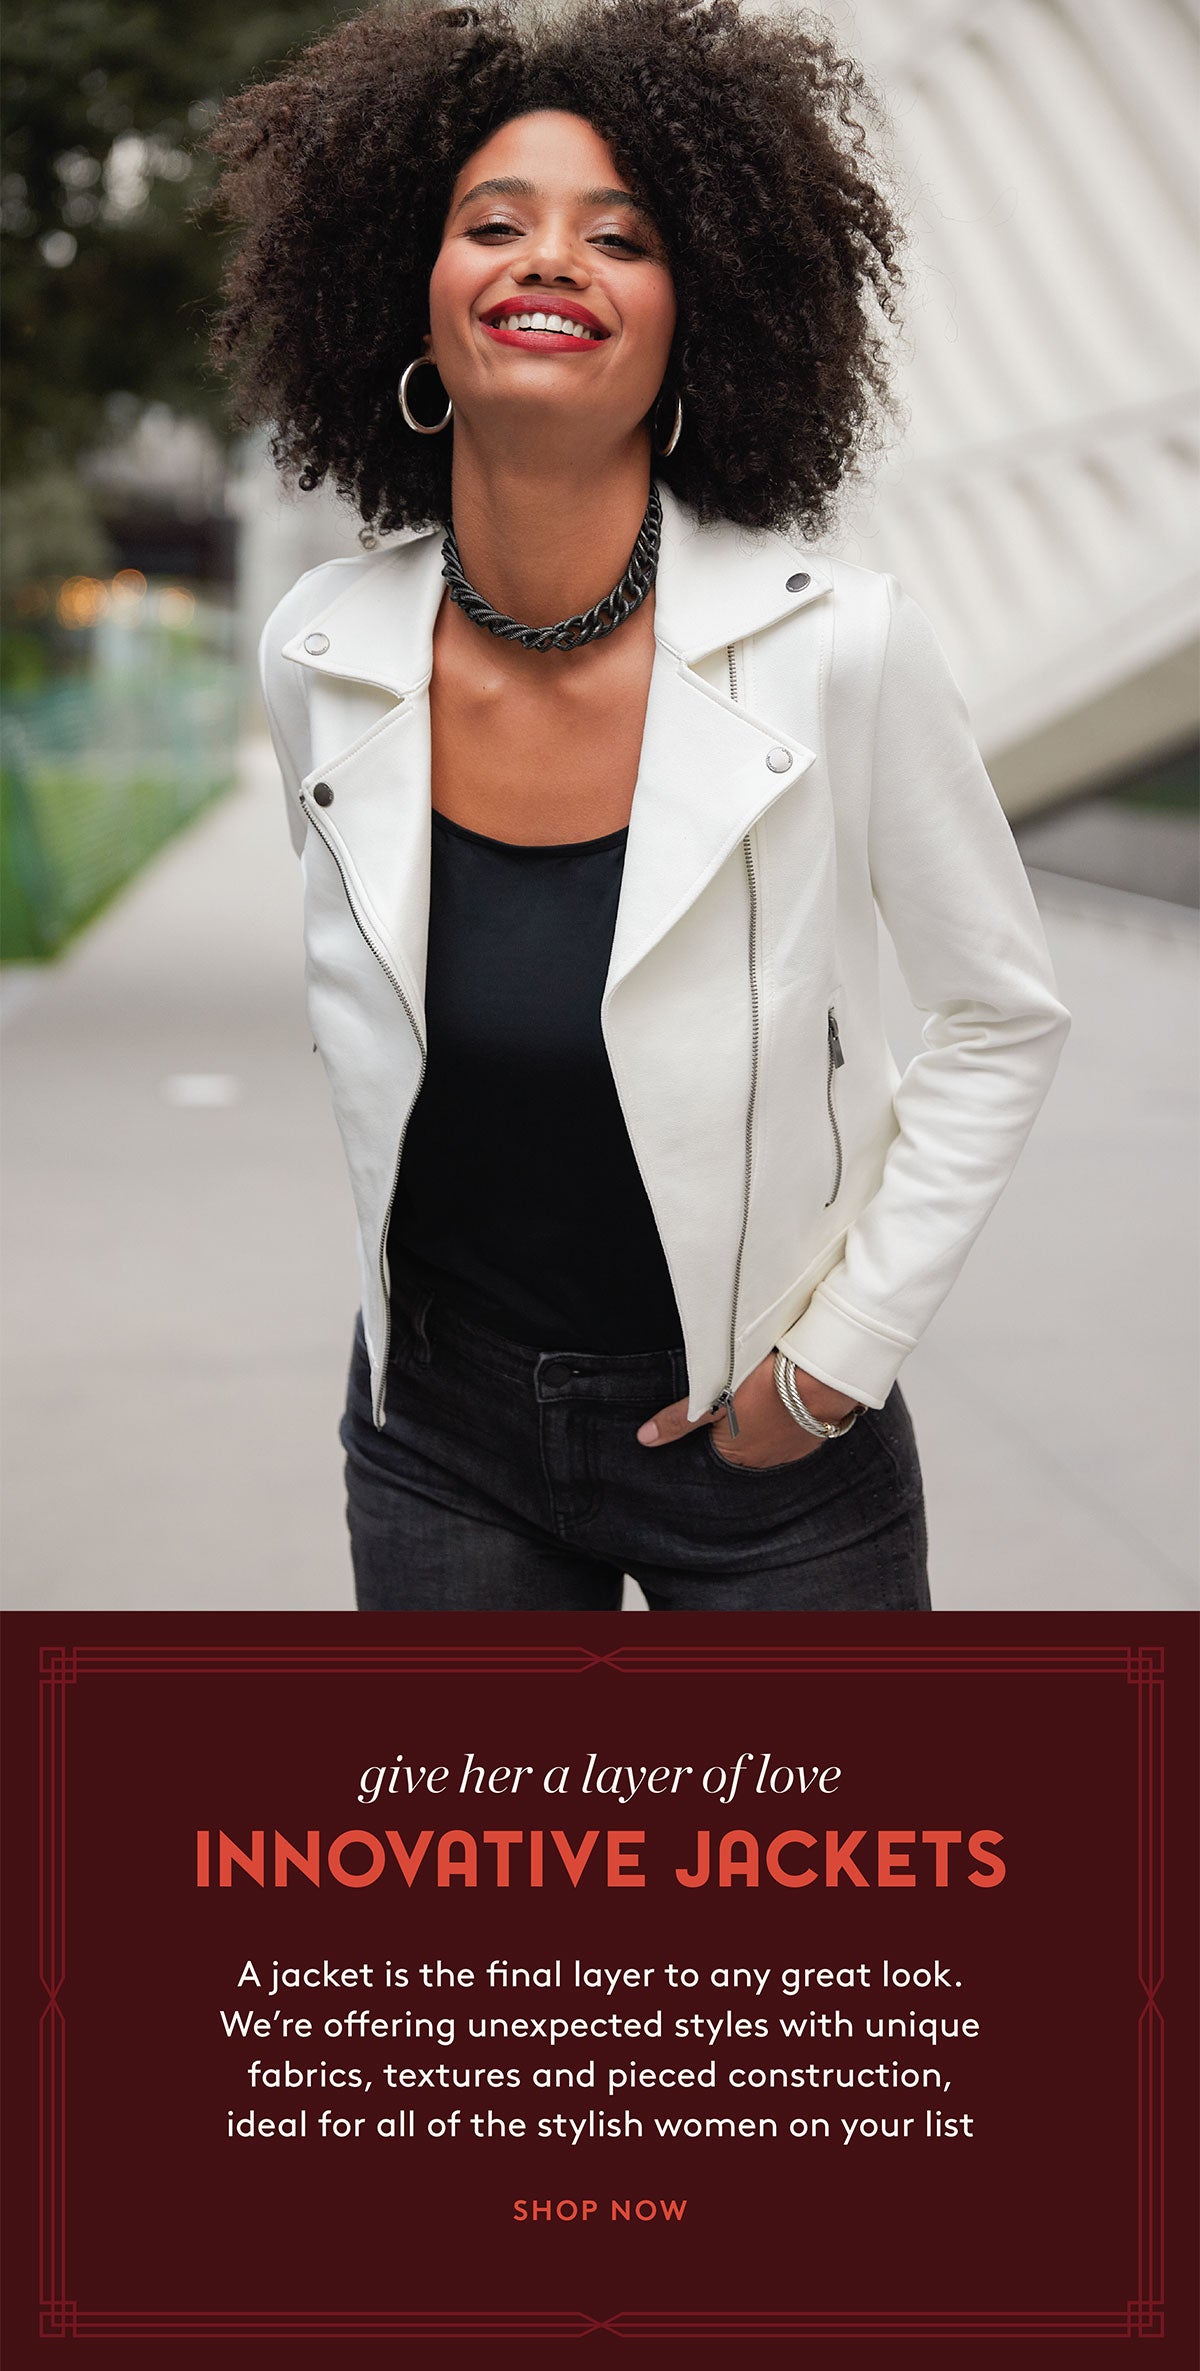 Give Her a Layer of Love: INNOVATIVE JACKETS A jacket is the final layer to any great look.  We're offering unexpected styles with unique fabrics, textures and pieced construction, ideal for all of the stylish women on your list!    SHOP NOW